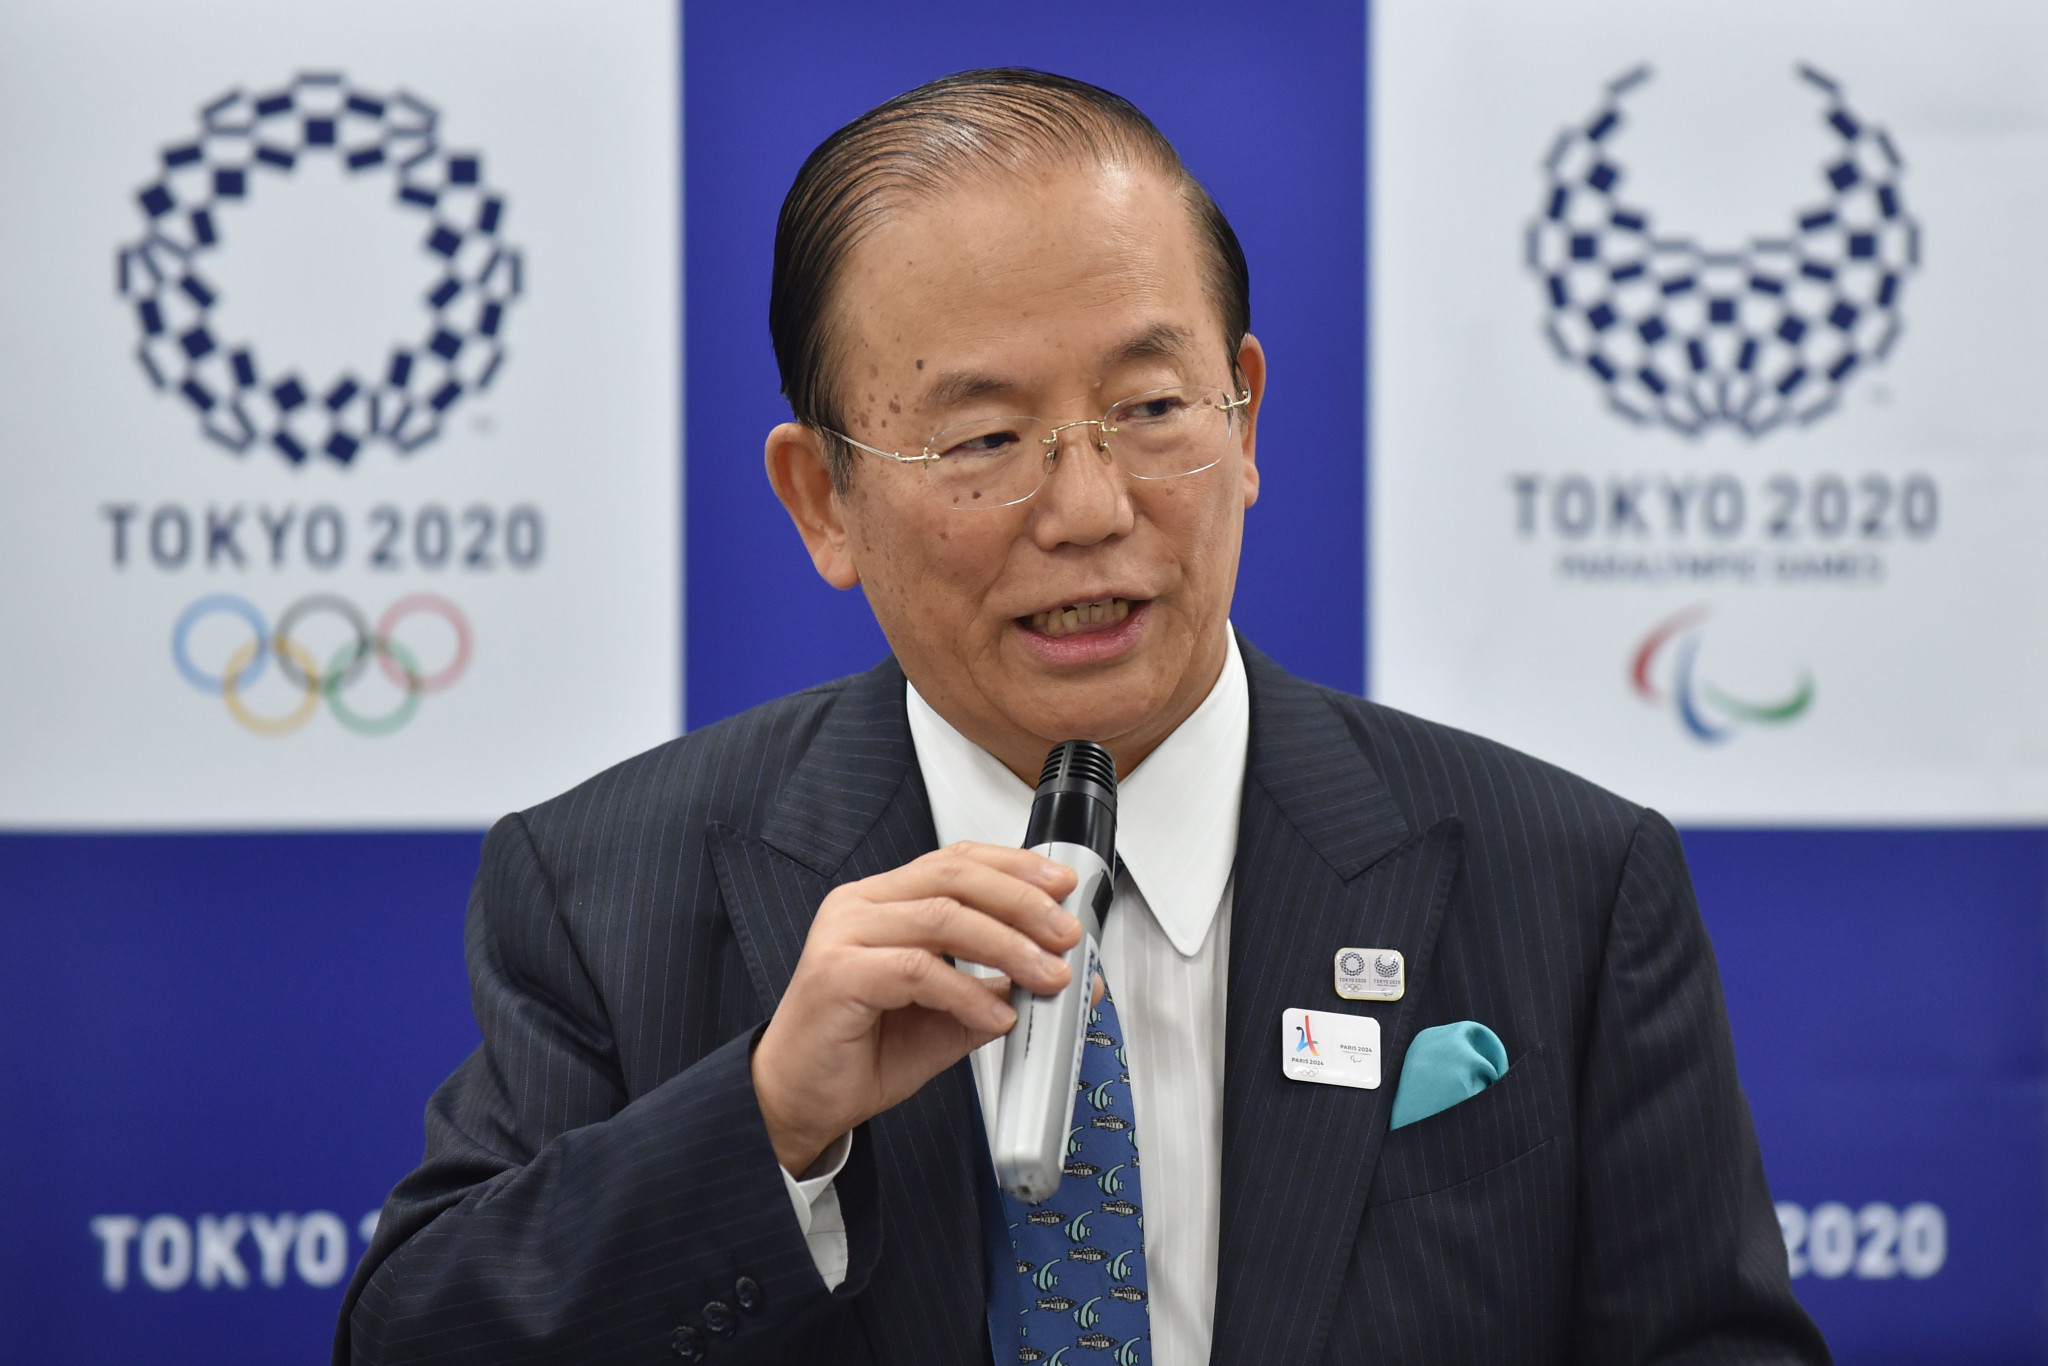 Tokyo 2020 chief executive claims "steady progress" being made as first World Press Briefing opens